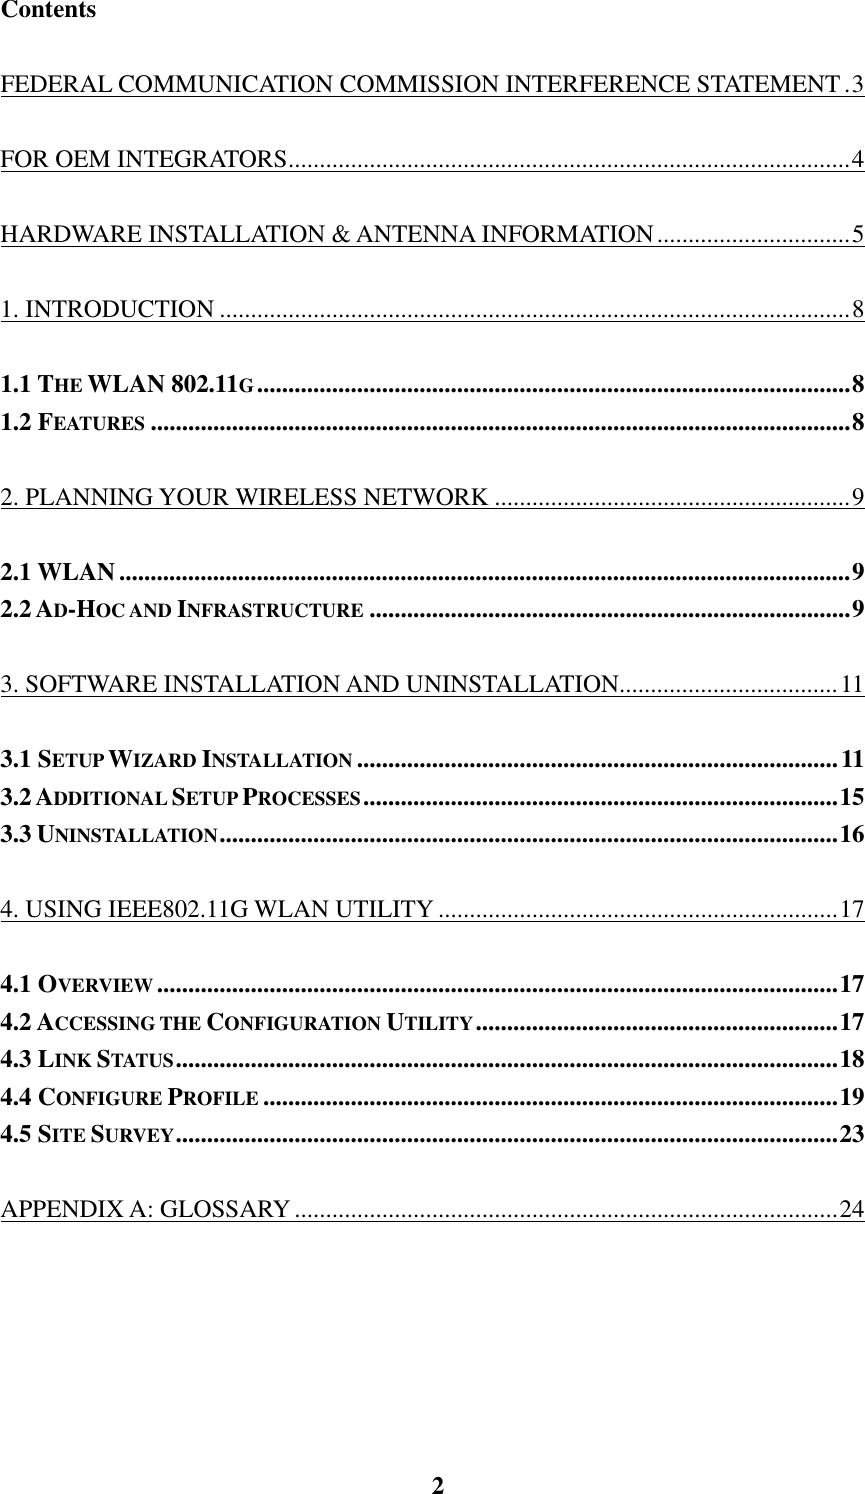    2Contents FEDERAL COMMUNICATION COMMISSION INTERFERENCE STATEMENT.3 FOR OEM INTEGRATORS..........................................................................................4 HARDWARE INSTALLATION &amp; ANTENNA INFORMATION...............................5 1. INTRODUCTION .....................................................................................................8 1.1 THE WLAN 802.11G...............................................................................................8 1.2 FEATURES ................................................................................................................8 2. PLANNING YOUR WIRELESS NETWORK .........................................................9 2.1 WLAN.....................................................................................................................9 2.2 AD-HOC AND INFRASTRUCTURE .............................................................................9 3. SOFTWARE INSTALLATION AND UNINSTALLATION...................................11 3.1 SETUP WIZARD INSTALLATION .............................................................................11 3.2 ADDITIONAL SETUP PROCESSES............................................................................15 3.3 UNINSTALLATION...................................................................................................16 4. USING IEEE802.11G WLAN UTILITY................................................................17 4.1 OVERVIEW .............................................................................................................17 4.2 ACCESSING THE CONFIGURATION UTILITY..........................................................17 4.3 LINK STATUS..........................................................................................................18 4.4 CONFIGURE PROFILE ............................................................................................19 4.5 SITE SURVEY..........................................................................................................23 APPENDIX A: GLOSSARY .......................................................................................24 